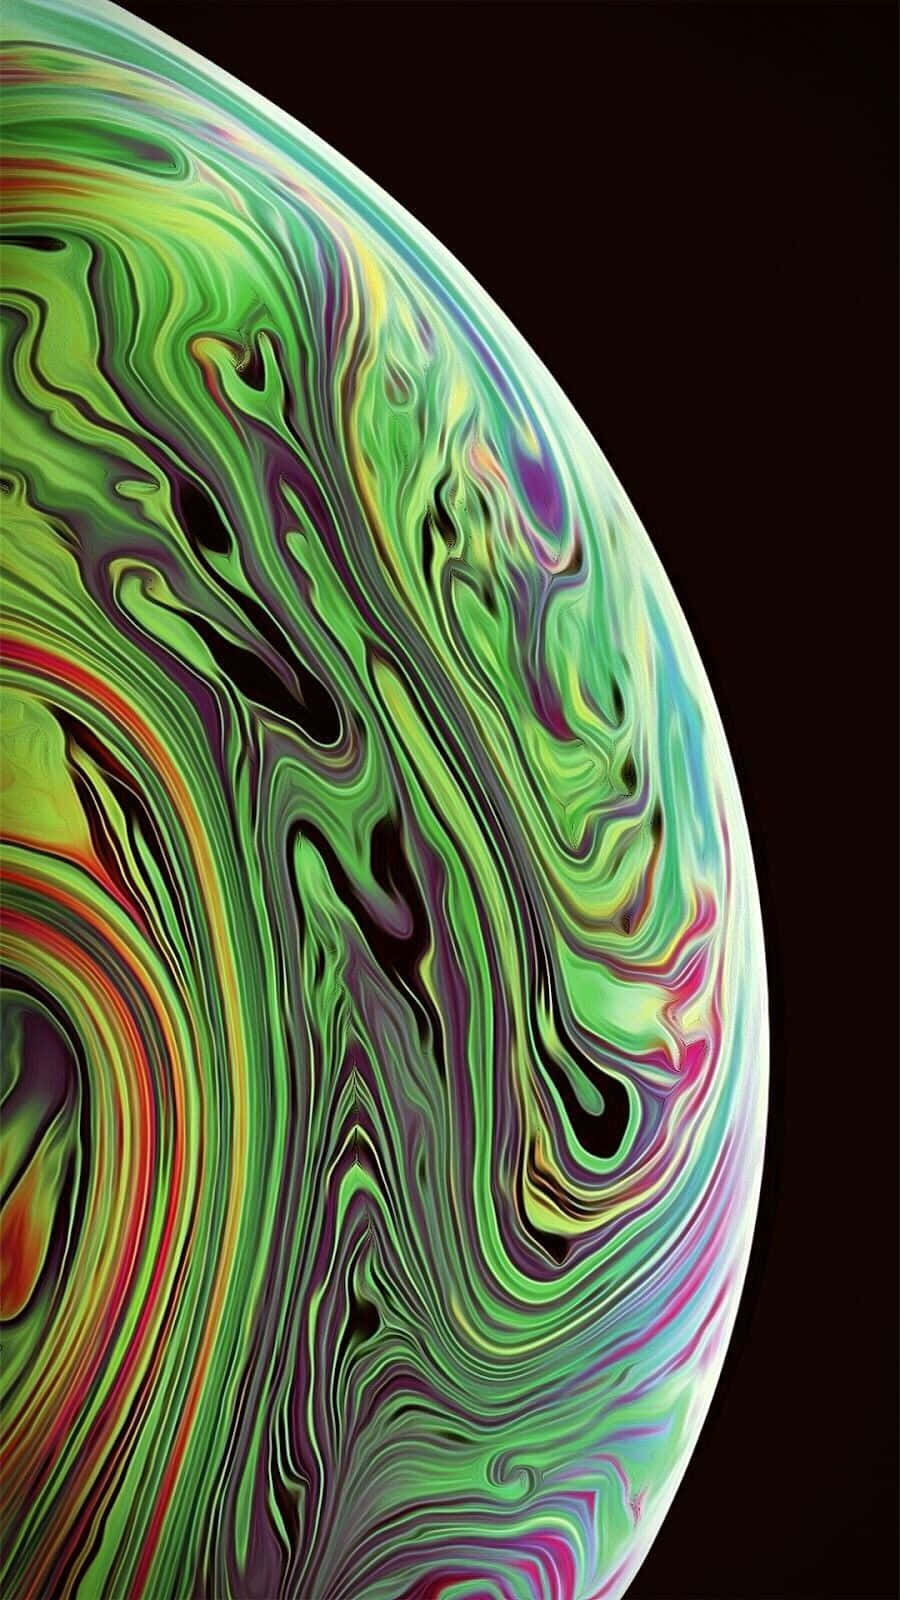 The Iphone X With Oled Display Wallpaper